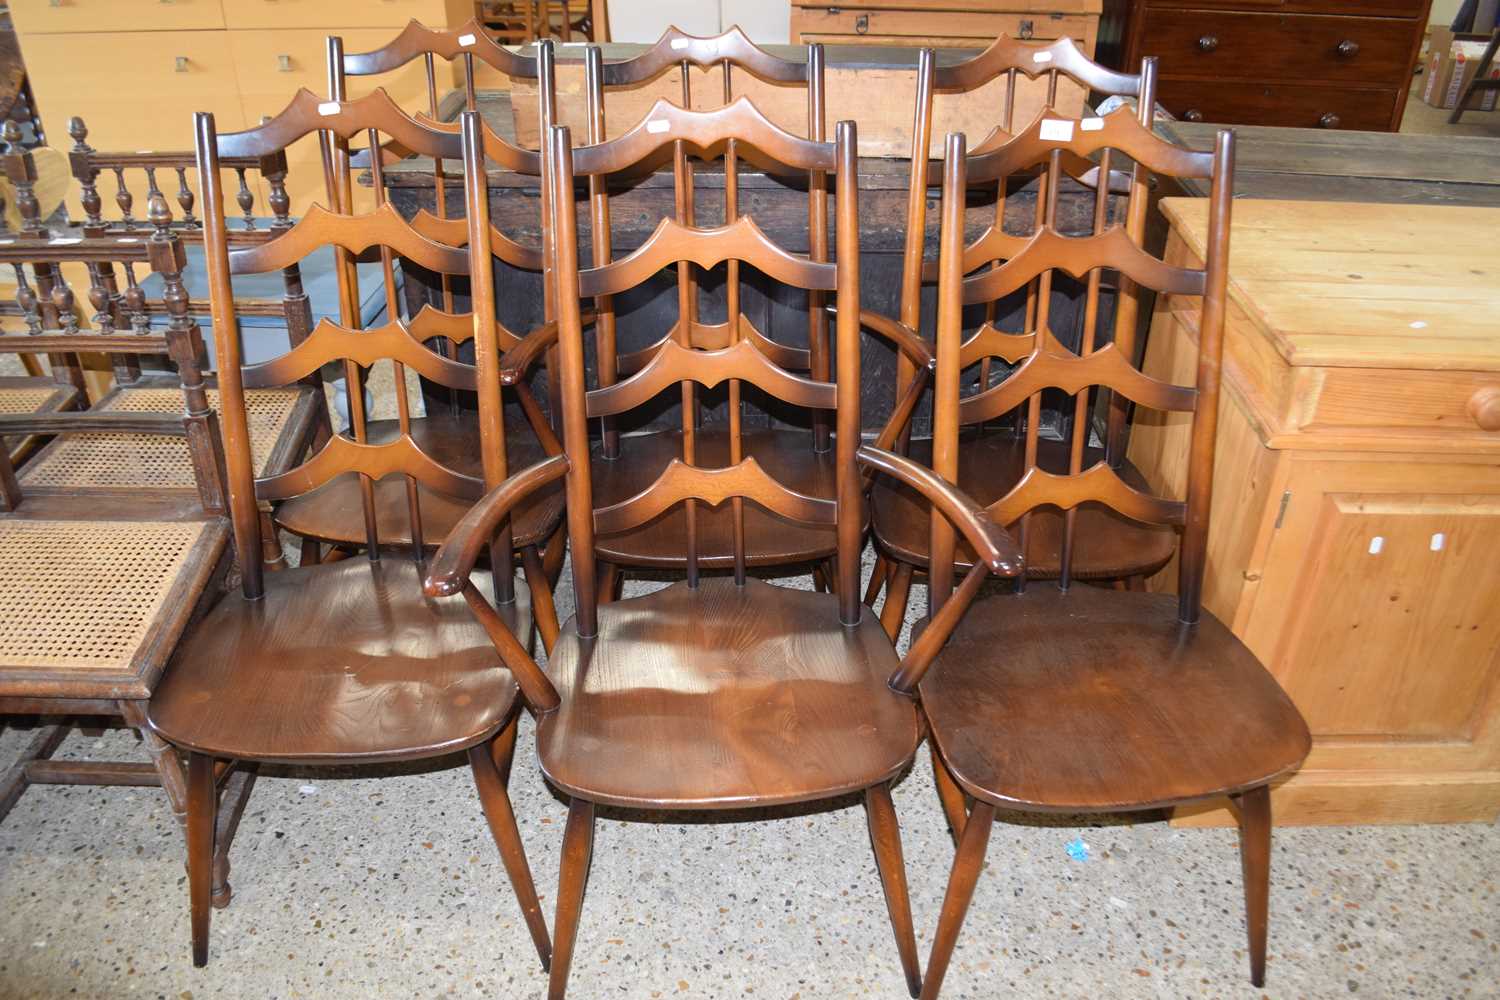 A matching set of six (four plus two) Ercol ladder back dining chairs